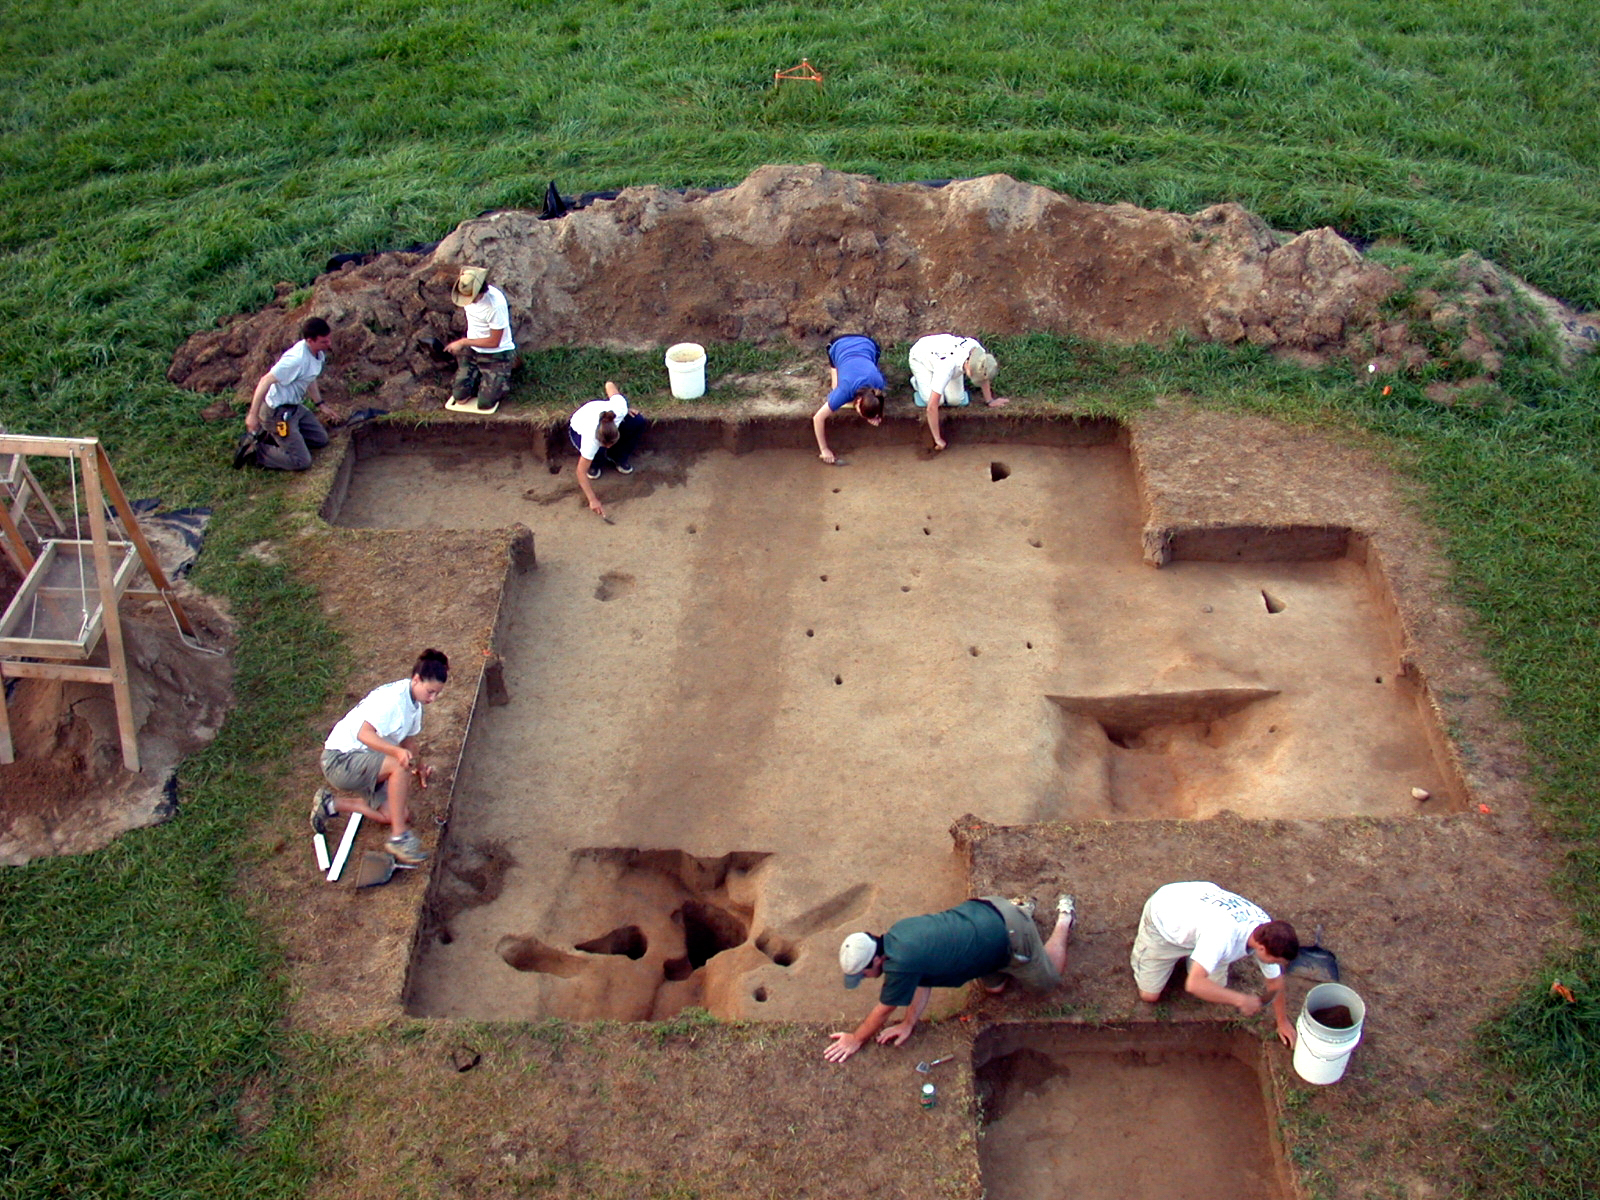 Eight archeologists carefully excavate a large pit at Werowocomoco that reveals dark stains in the earth. The stains indicate the presence of parallel trenches constructed in the Native site.